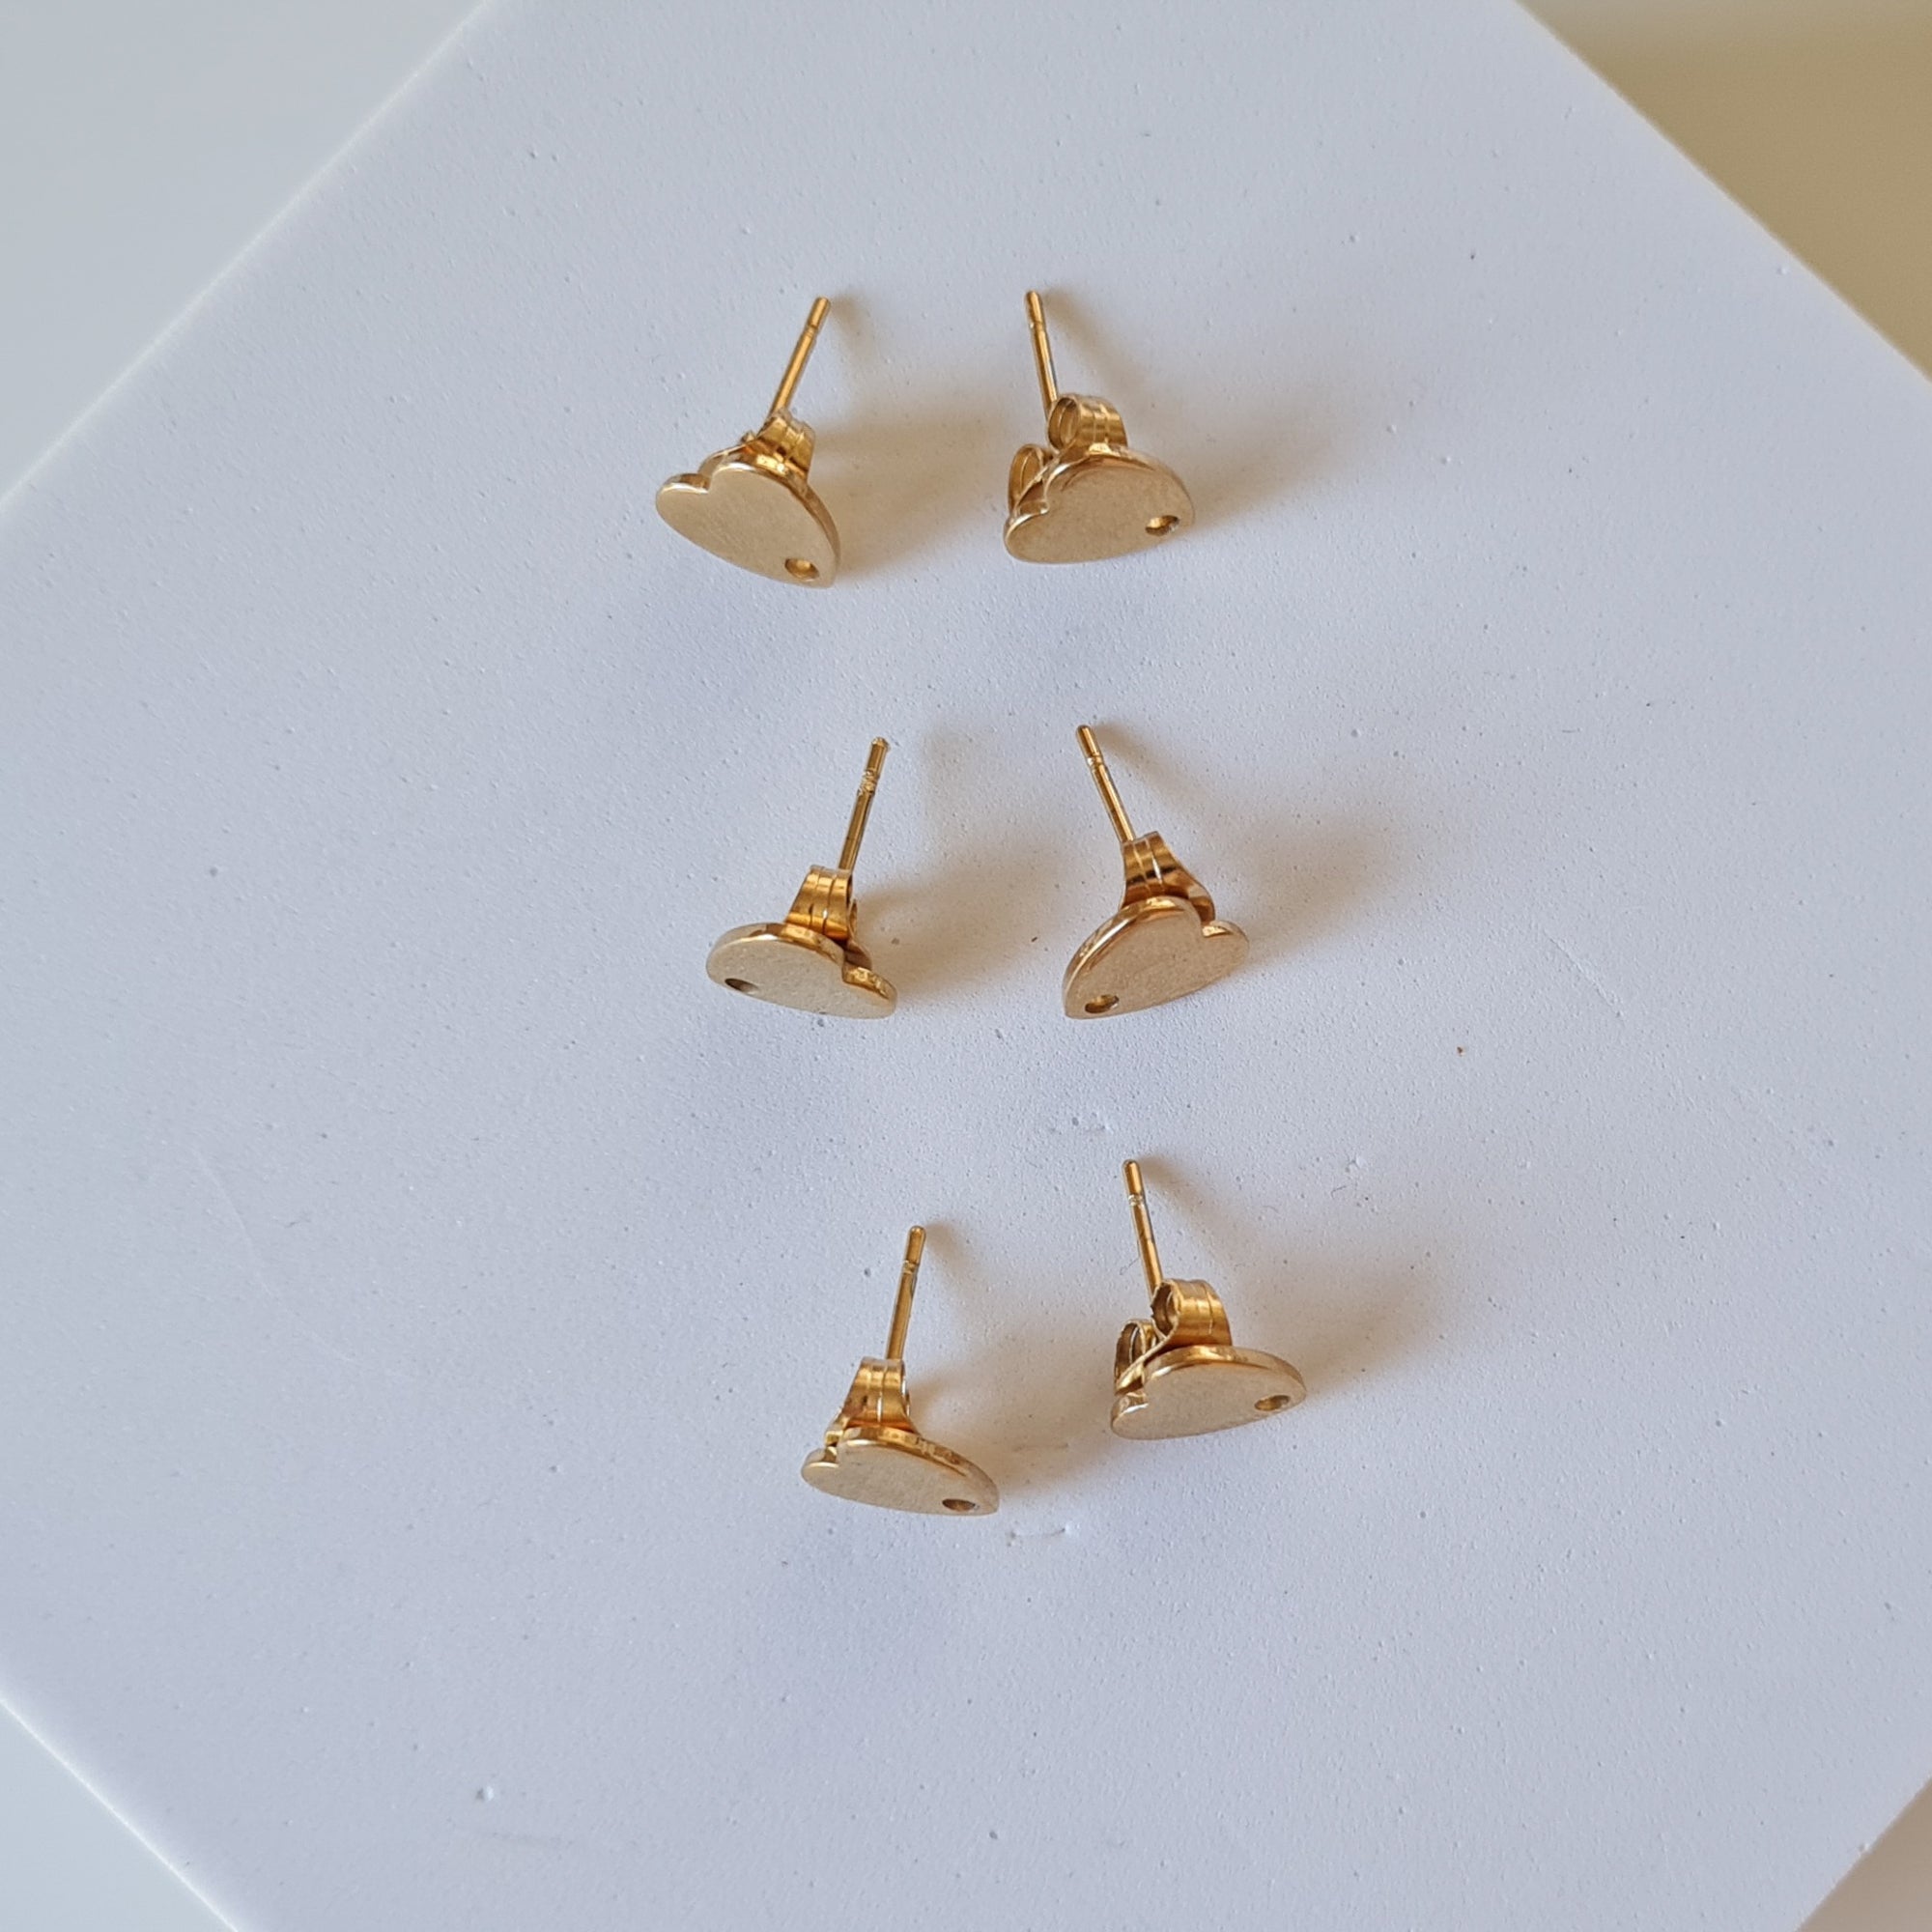 18k Gold Plated Earring Posts with Heart Studs and Butterfly Backings - Set of 10